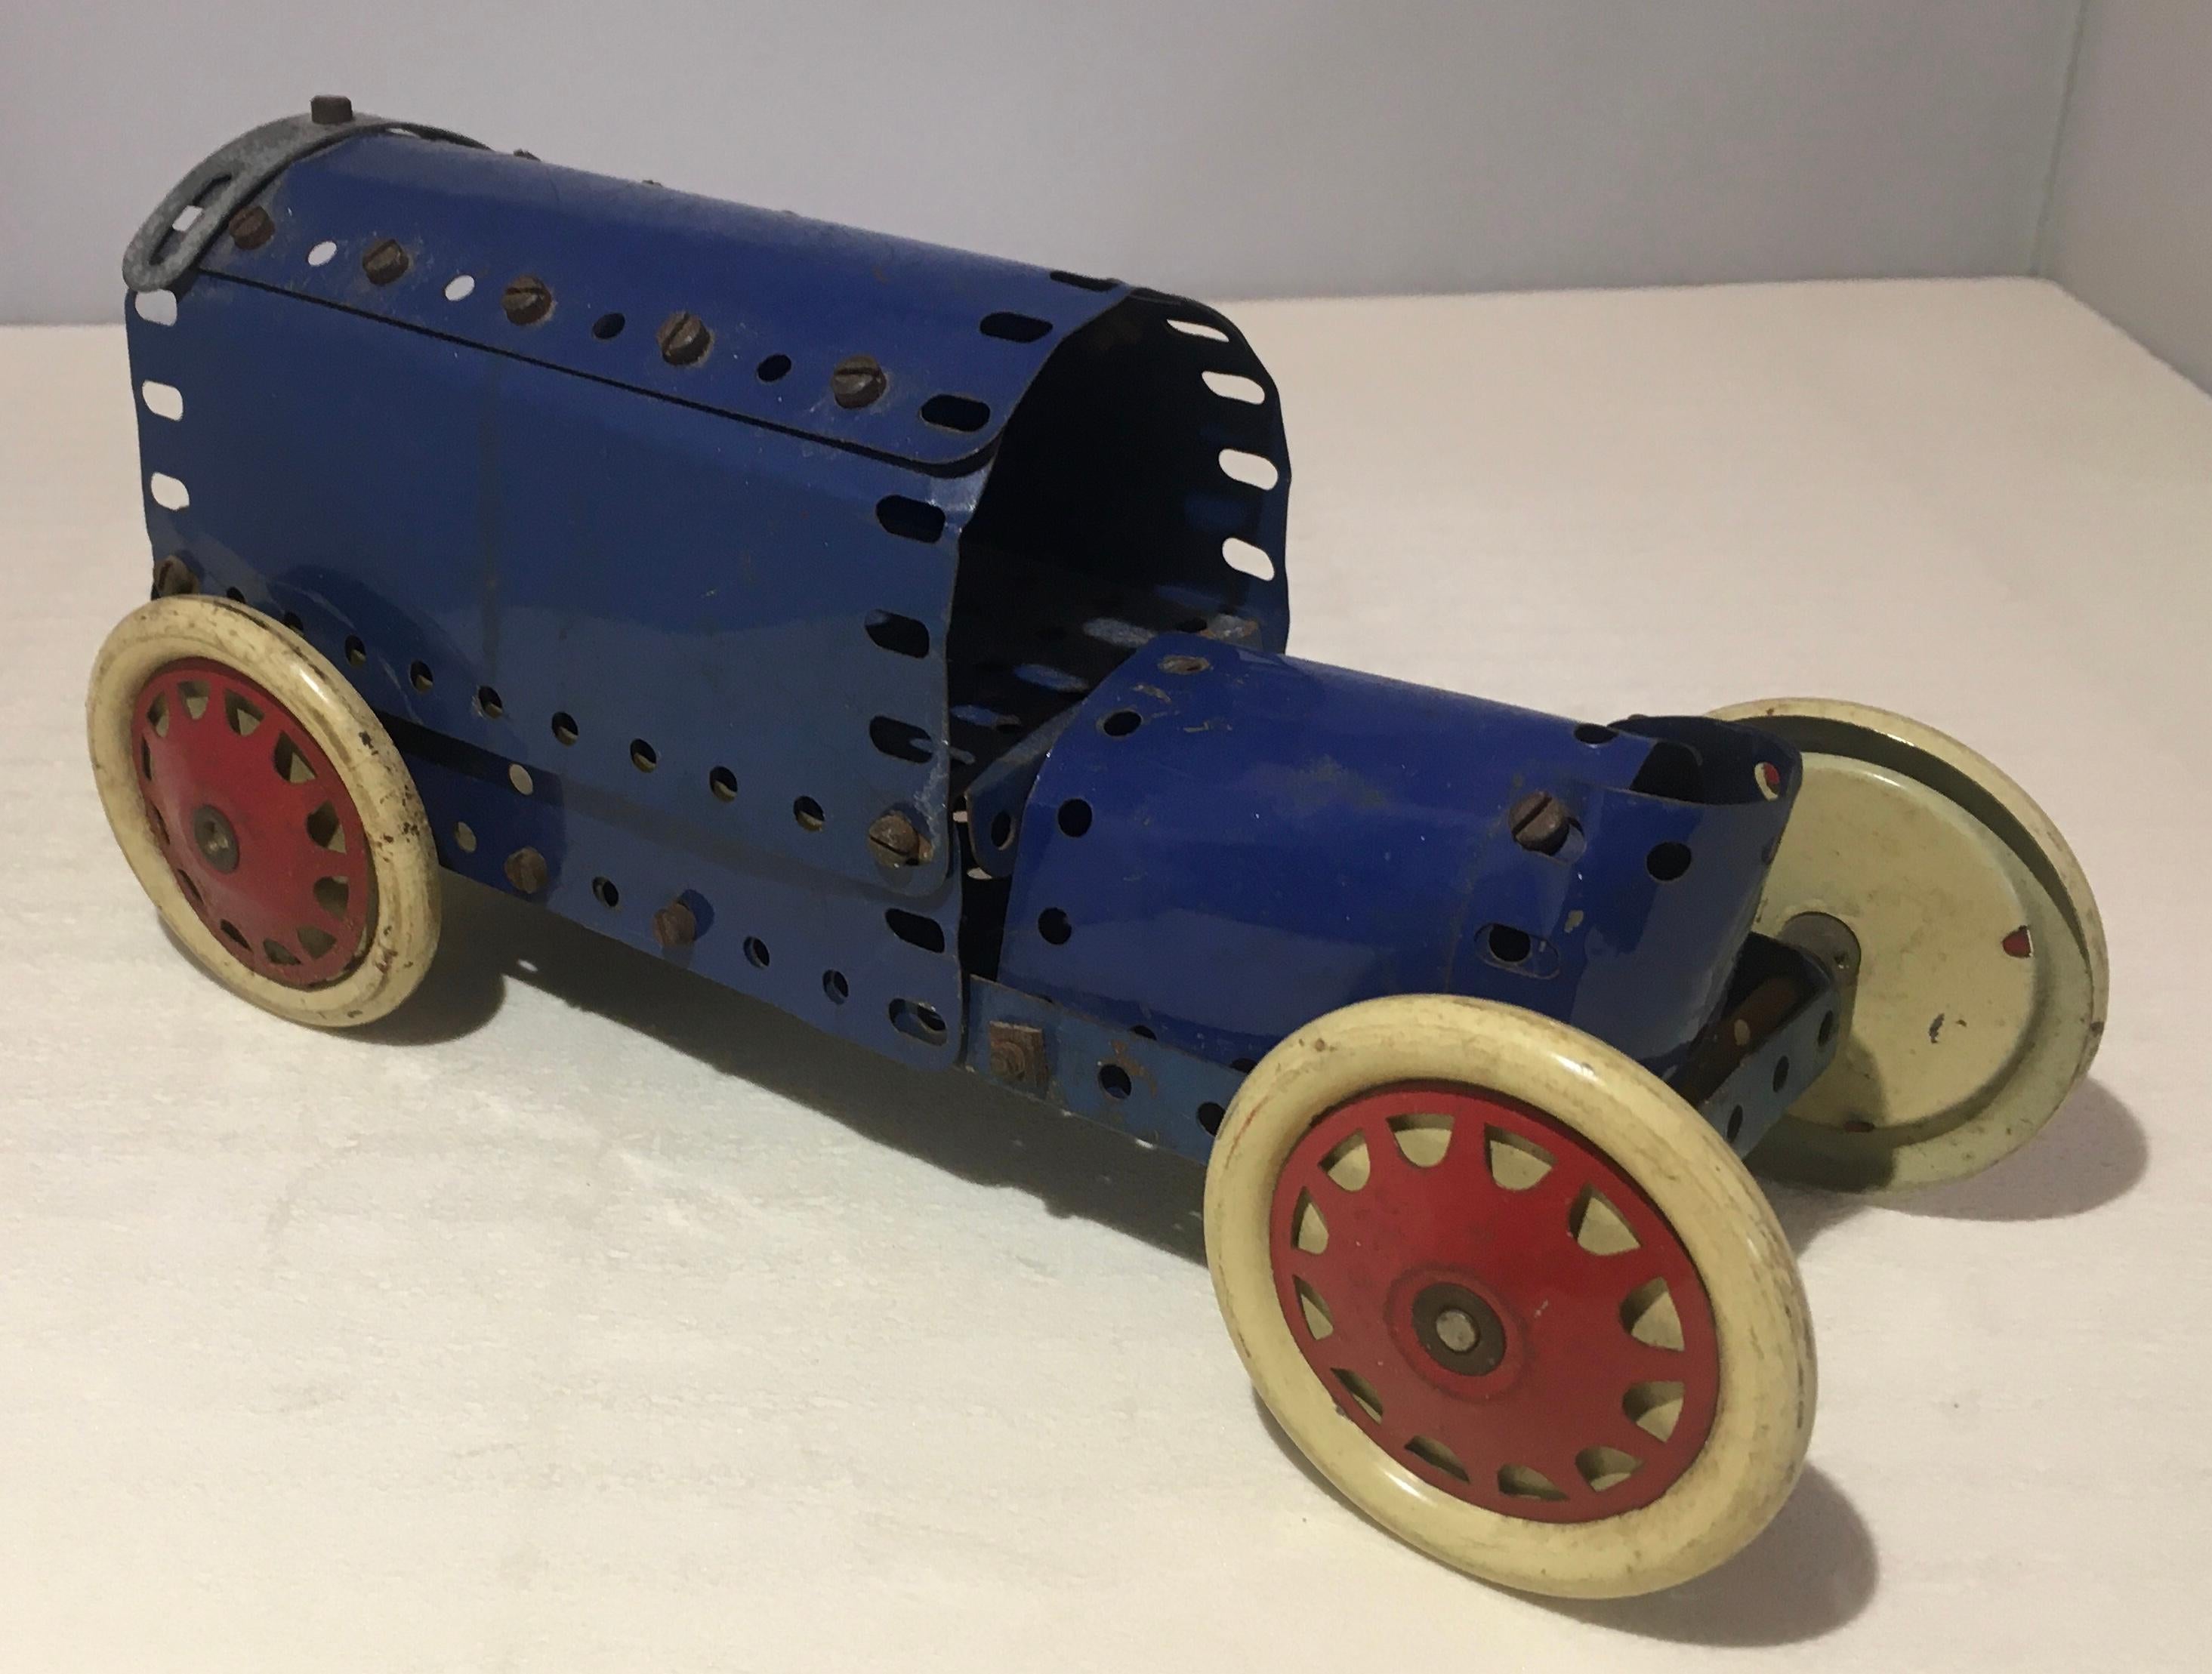 Great collectible. Meccano, this great system of construction, born at the beginning of the 20th century.

Toy store display, circa 1927. This is a very cool and rare Meccano constructed automobile with a distinct Brass Era aesthetic. 

Measures: 10